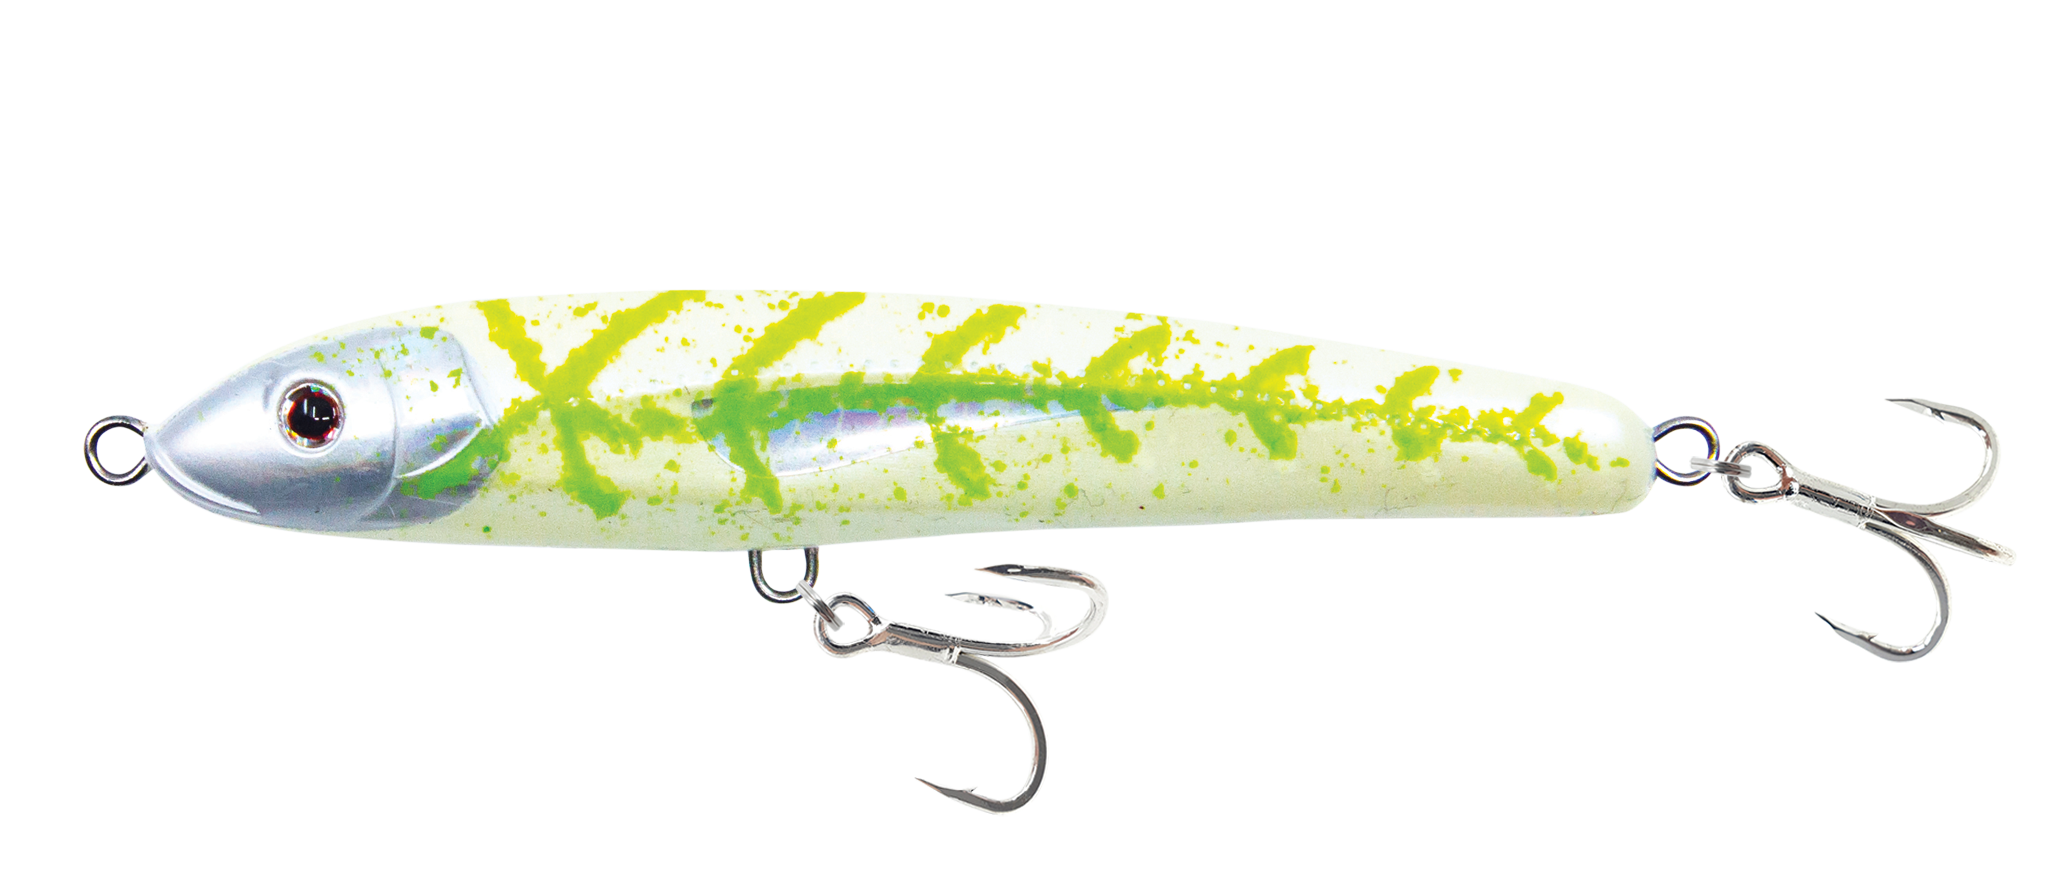 Our Nomad Design Pelagic Stick Baits & Poppers Nomad Riptide 125mm Sinking Hard  Body Fishing Lures is in short supply in spring 2021